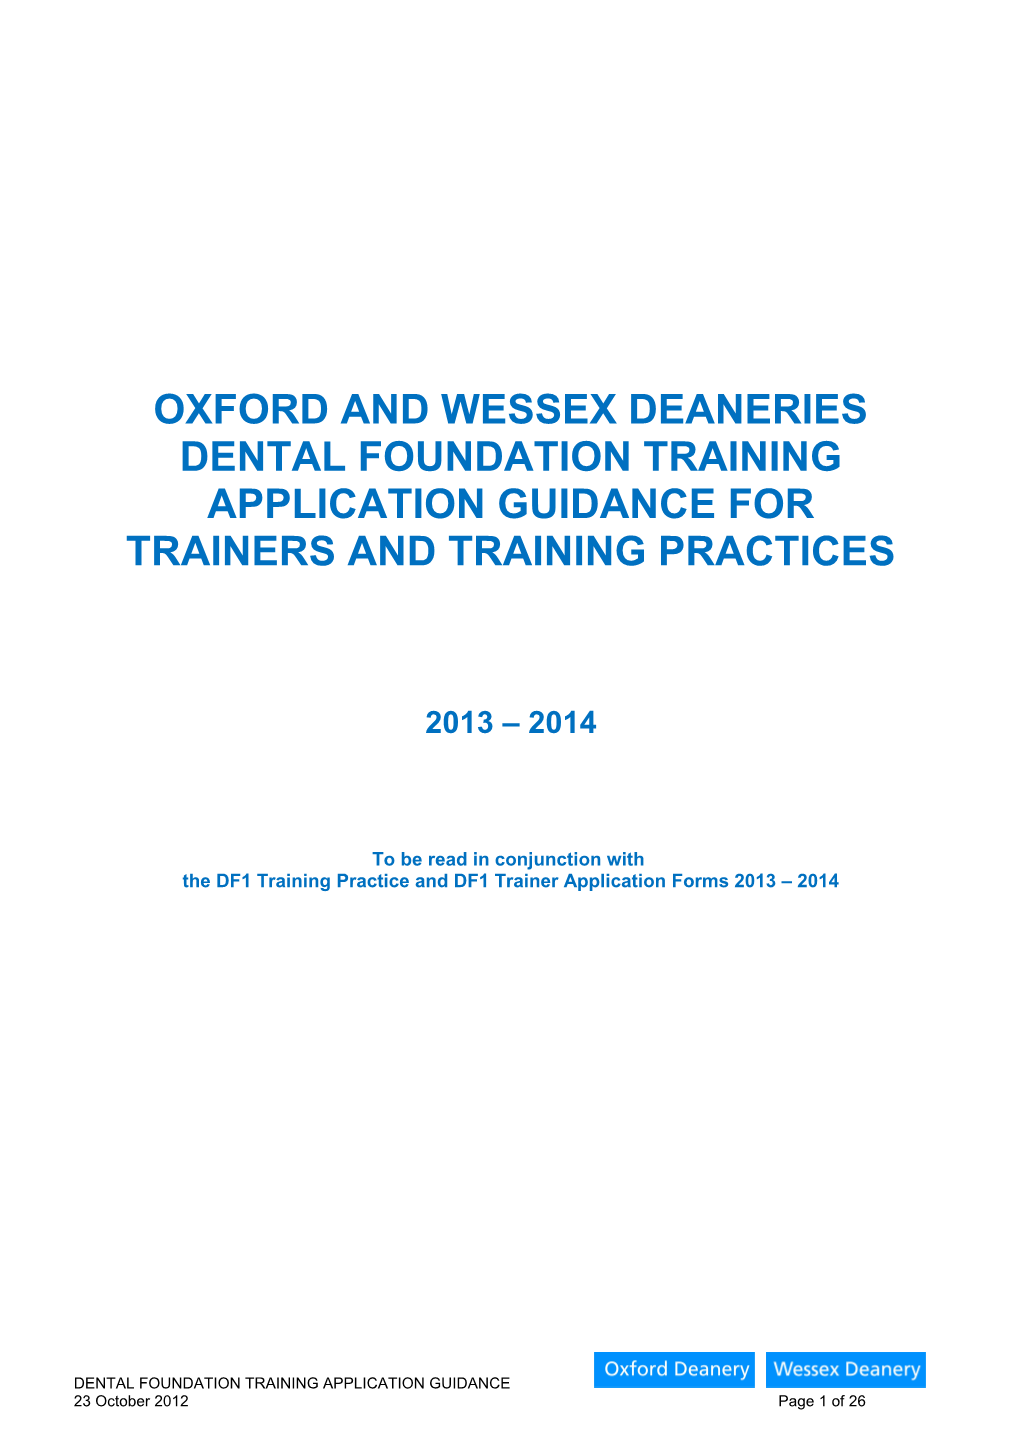 Vocational Training for General Dental Practice in the Oxford Region